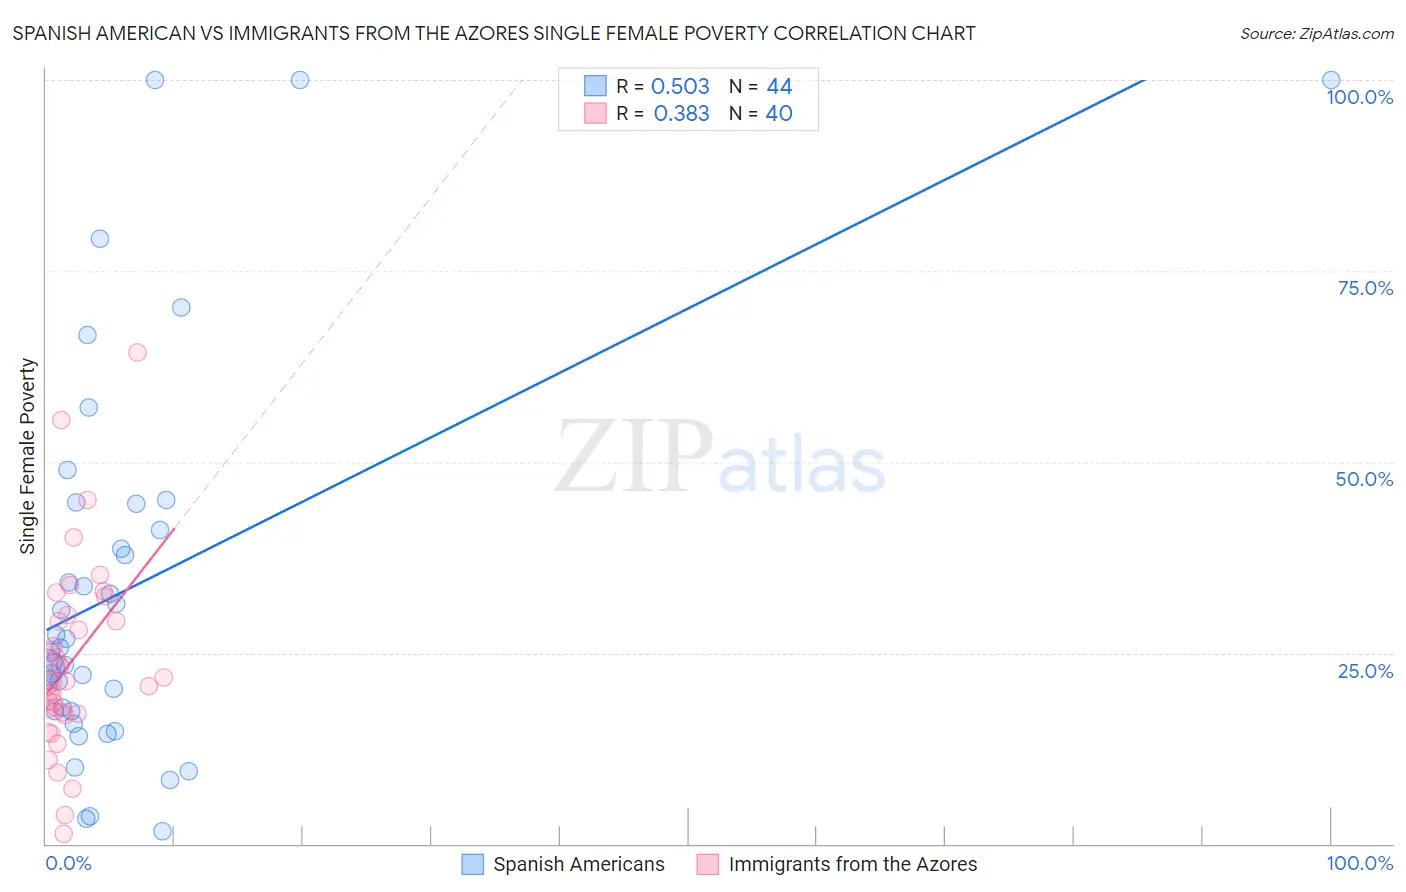 Spanish American vs Immigrants from the Azores Single Female Poverty